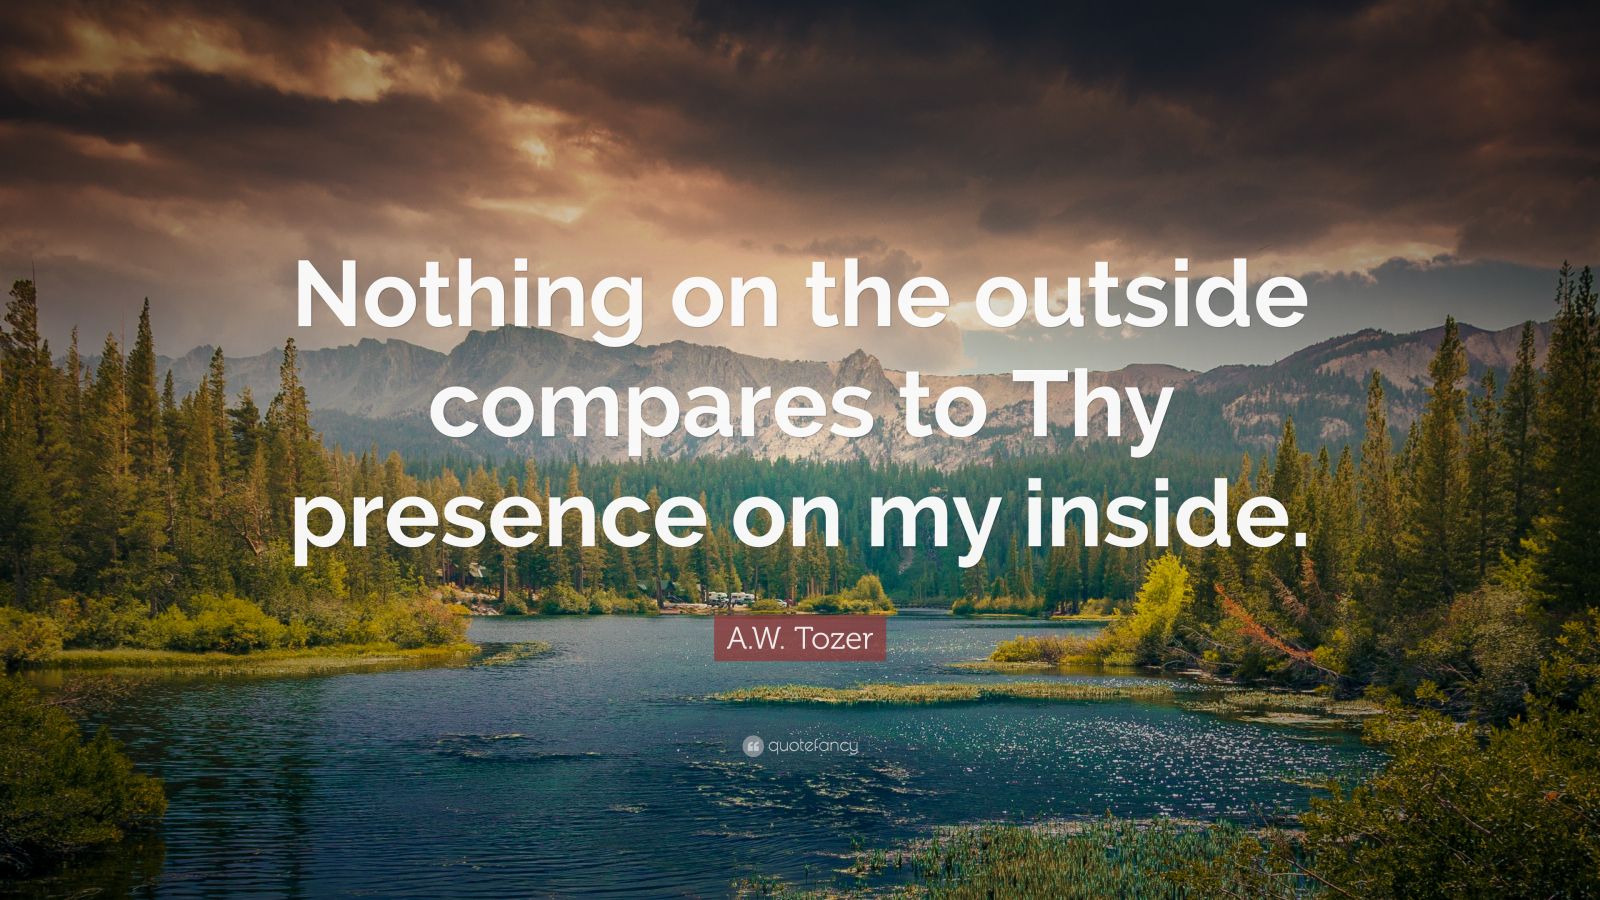 6753452 A W Tozer Quote Nothing on the outside compares to Thy presence on